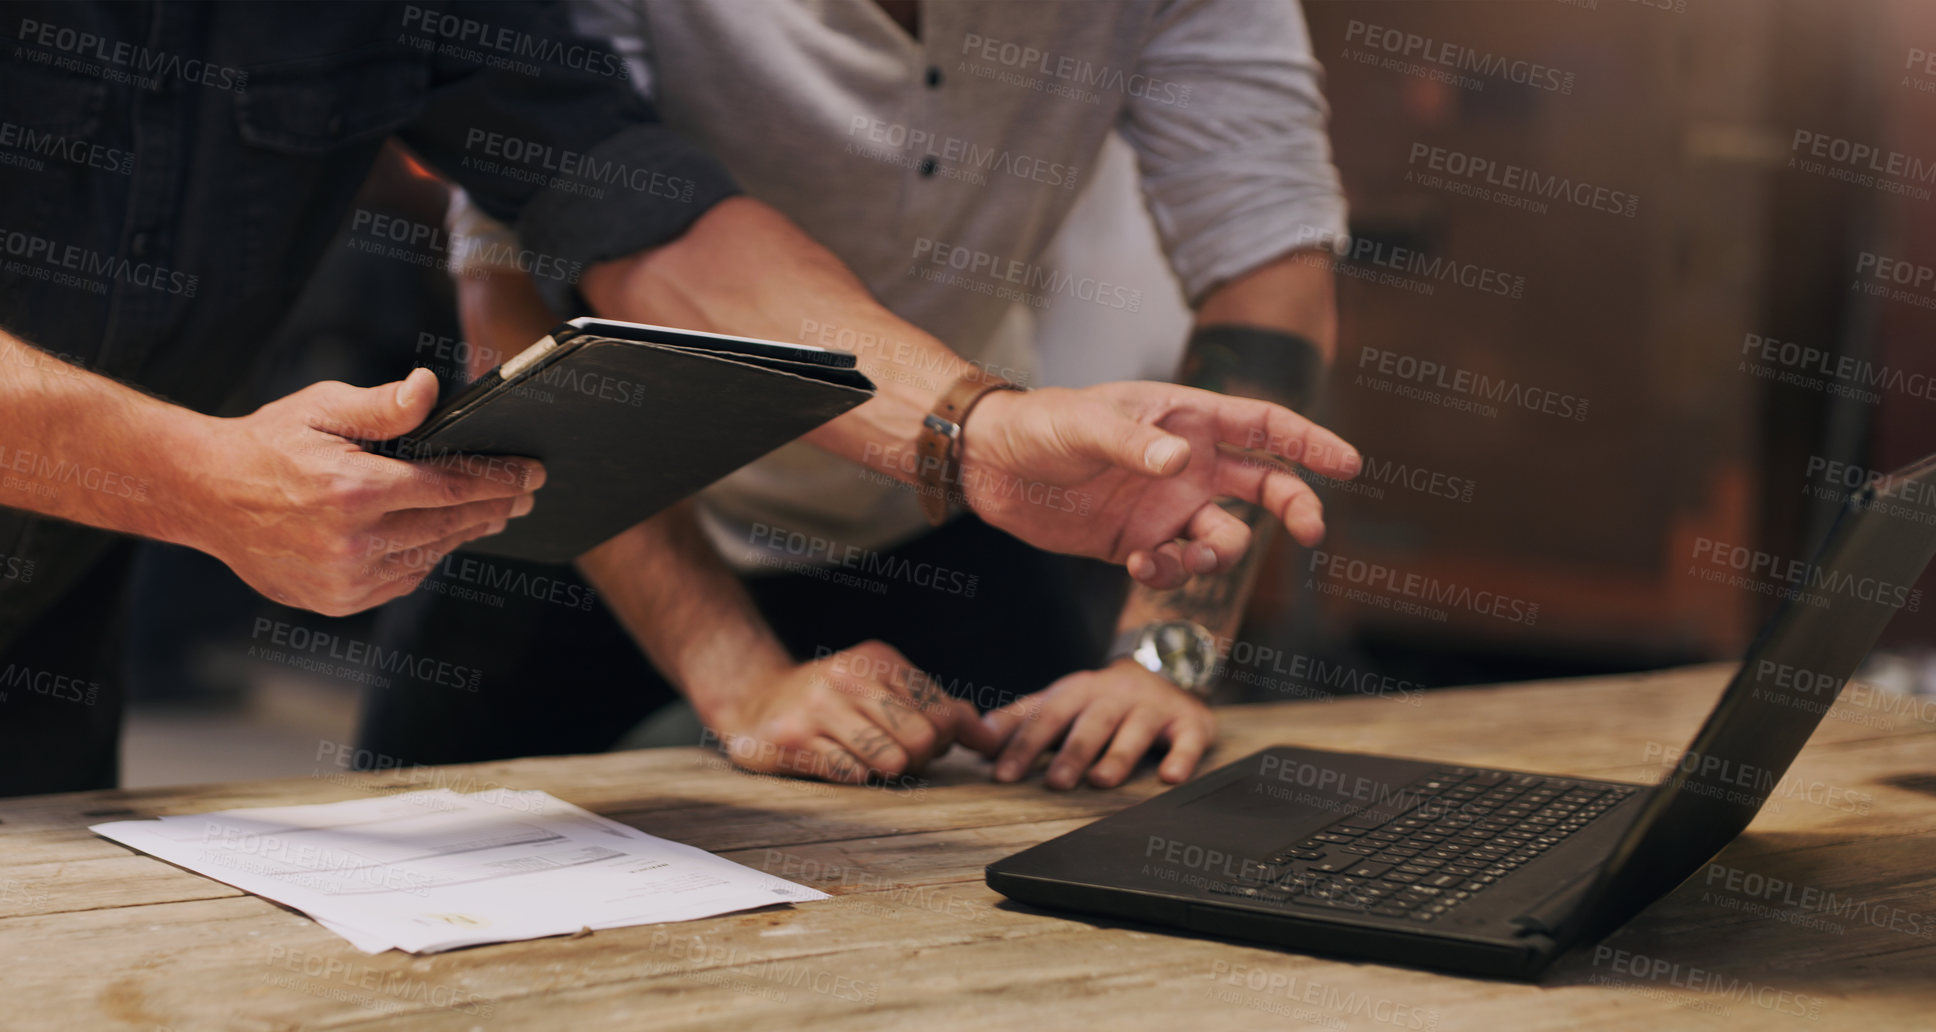 Buy stock photo Laptop, tablet and hands of business people with planning, paperwork and creative ideas at startup. Workshop, meeting and men in office together for research, growth and development at design agency.